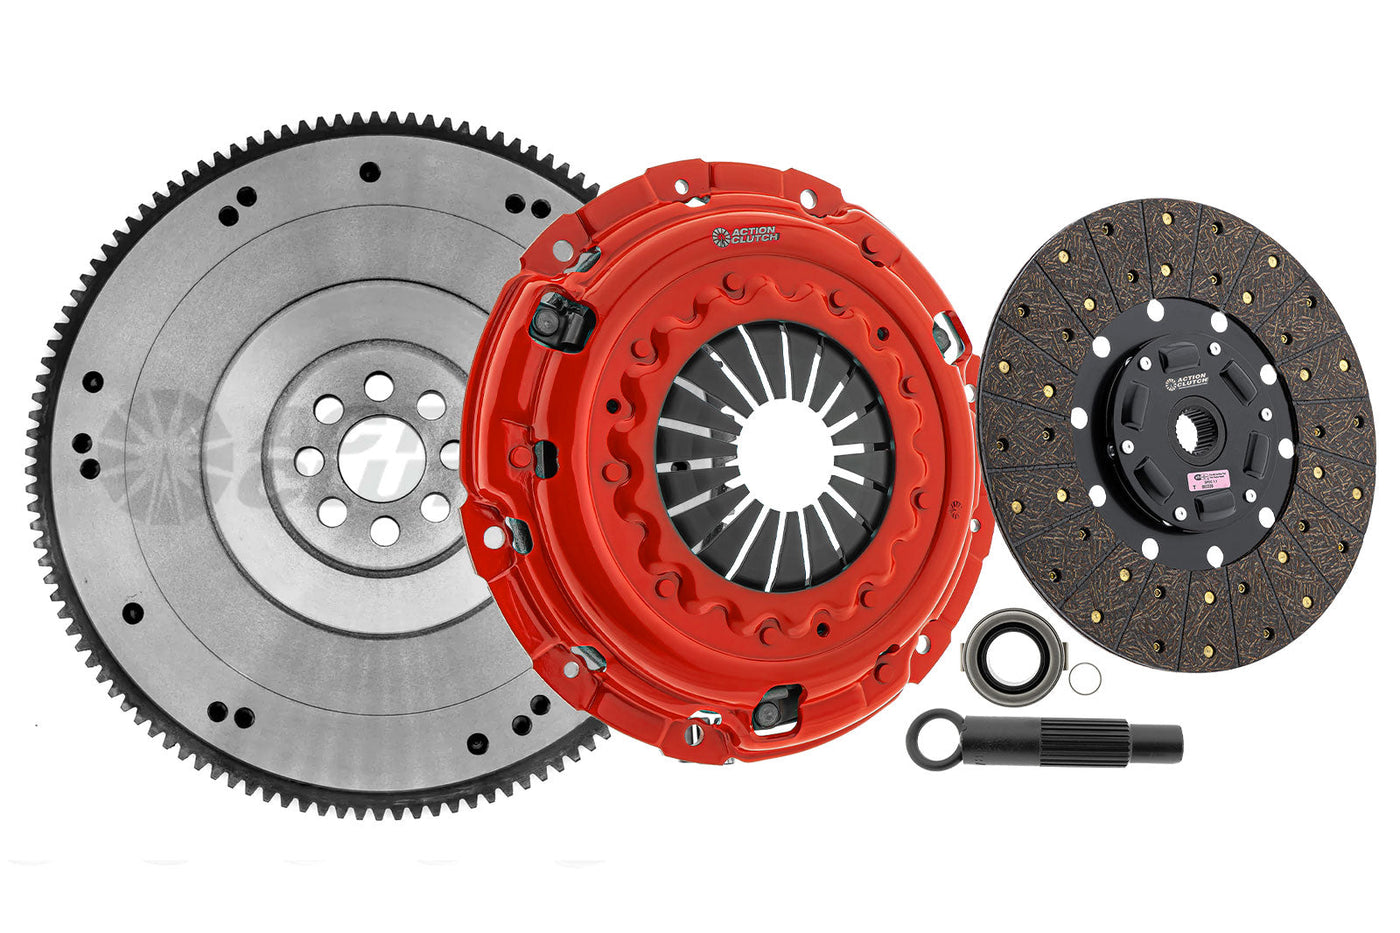 Stage 1 Clutch Kit (1OS) for Honda Civic SI 2012-2015 2.4L (K24Z7) Includes OE HD Flywheel